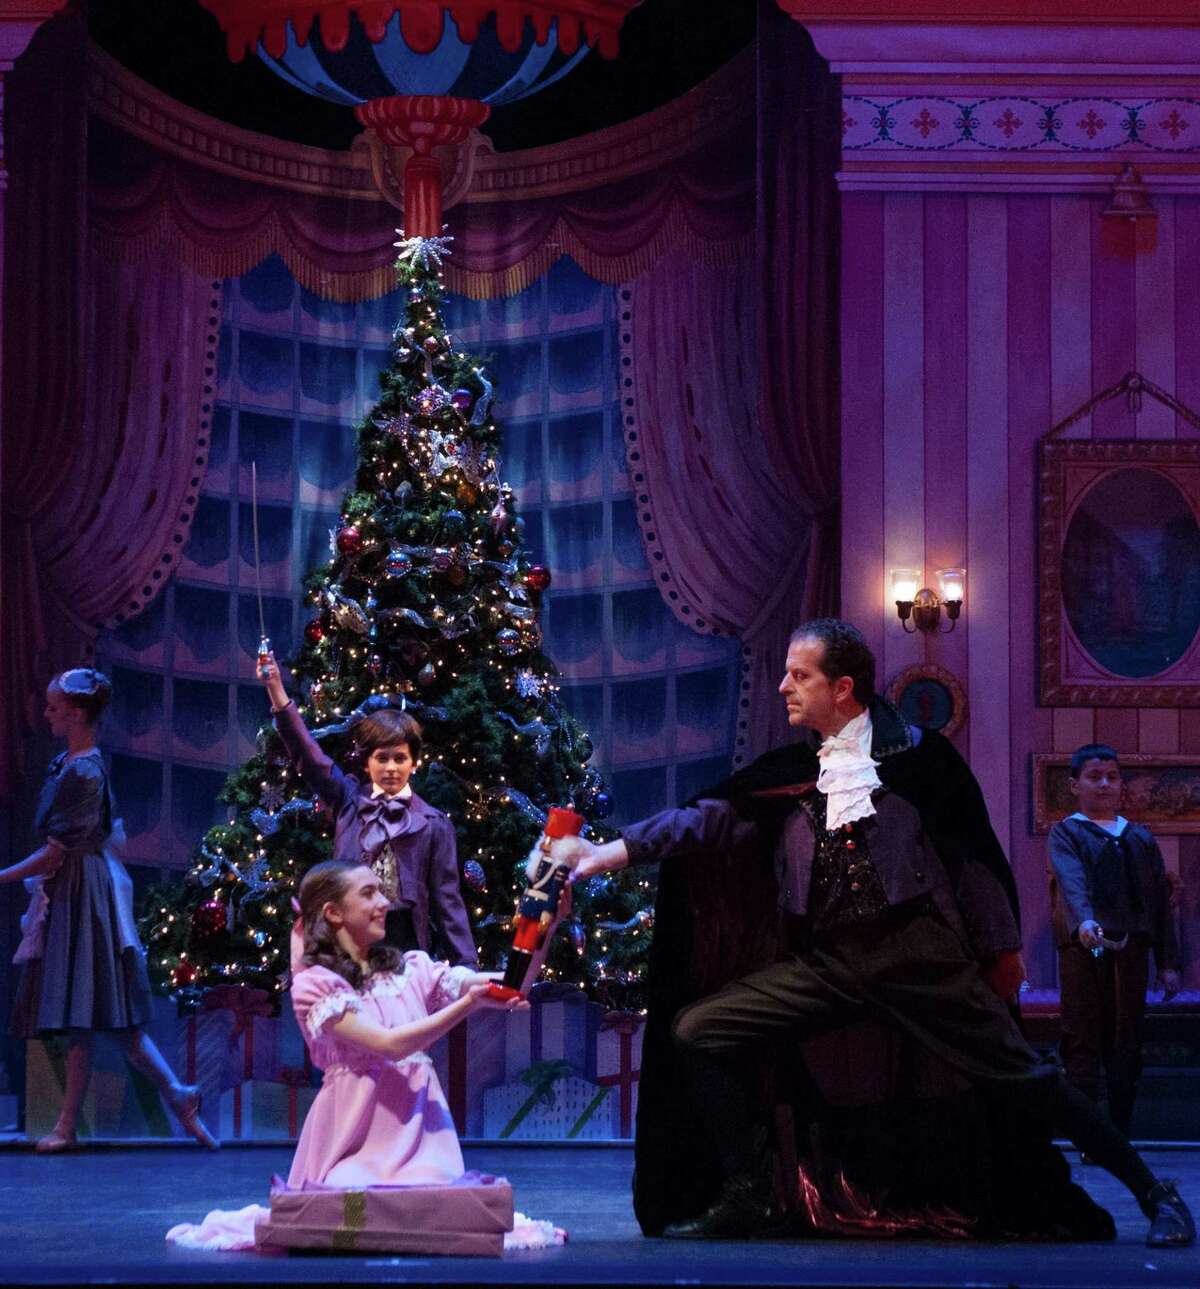 The Nutmeg Conservatory will present its annual performances of "The Nutcracker" at the Warner Theatre on Dec. 9-10.